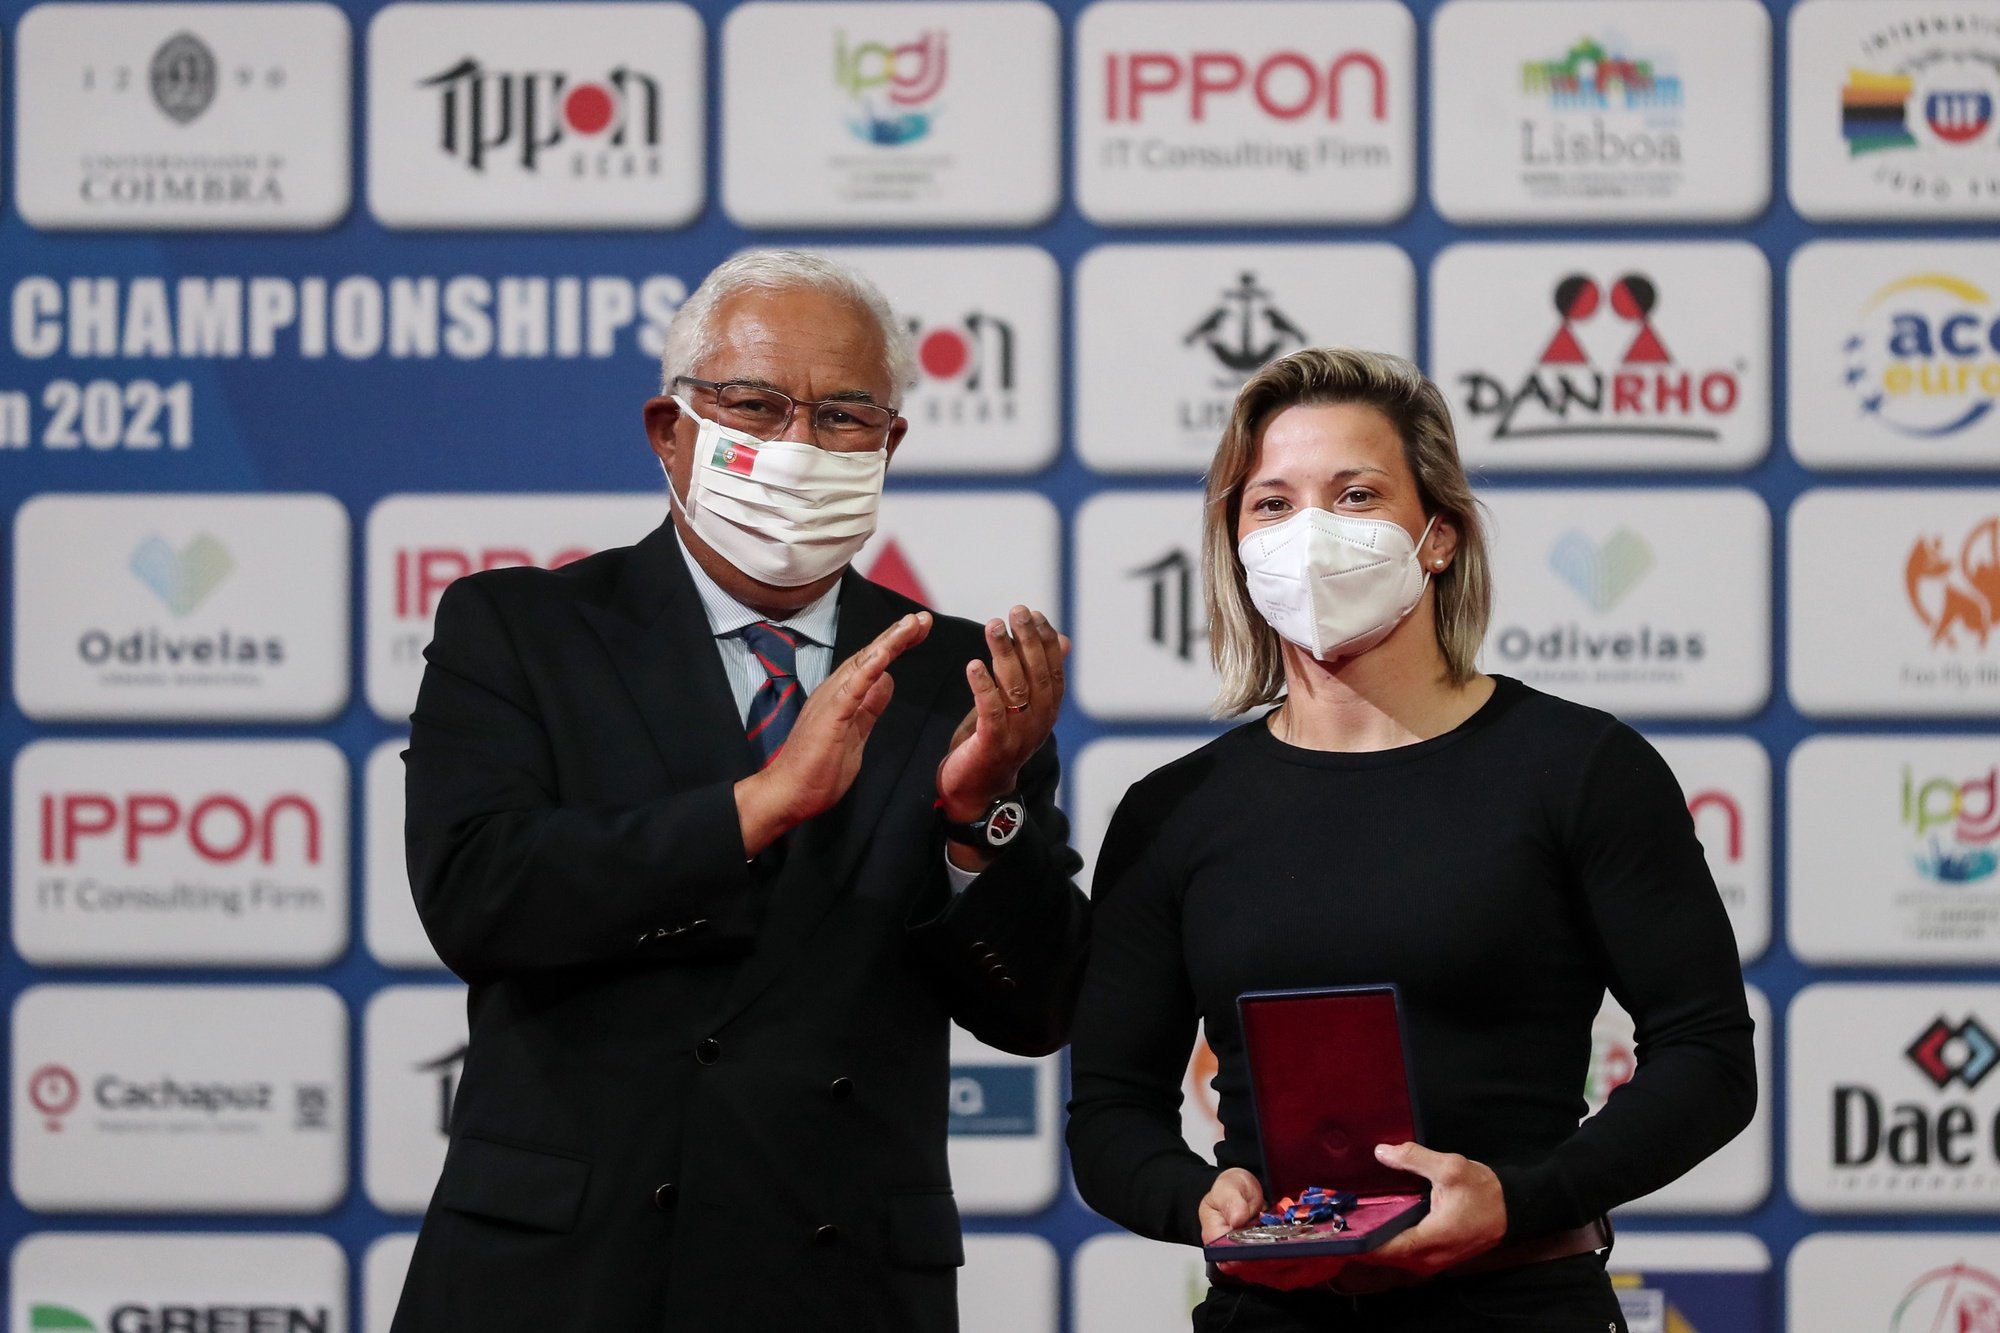 Telma Monteiro (R) of Portugal, winner of the gold medal in yesterday`s competition in the women&#039;s -57Kg category, flanked by the Portuguese Prime-minister, António Costa, receives the &quot;Medal of Honor of Sports Merit&quot; delivered at the European Judo Championships in Lisbon, Portugal, 17 April 2021. NUNO VEIGA/LUSA